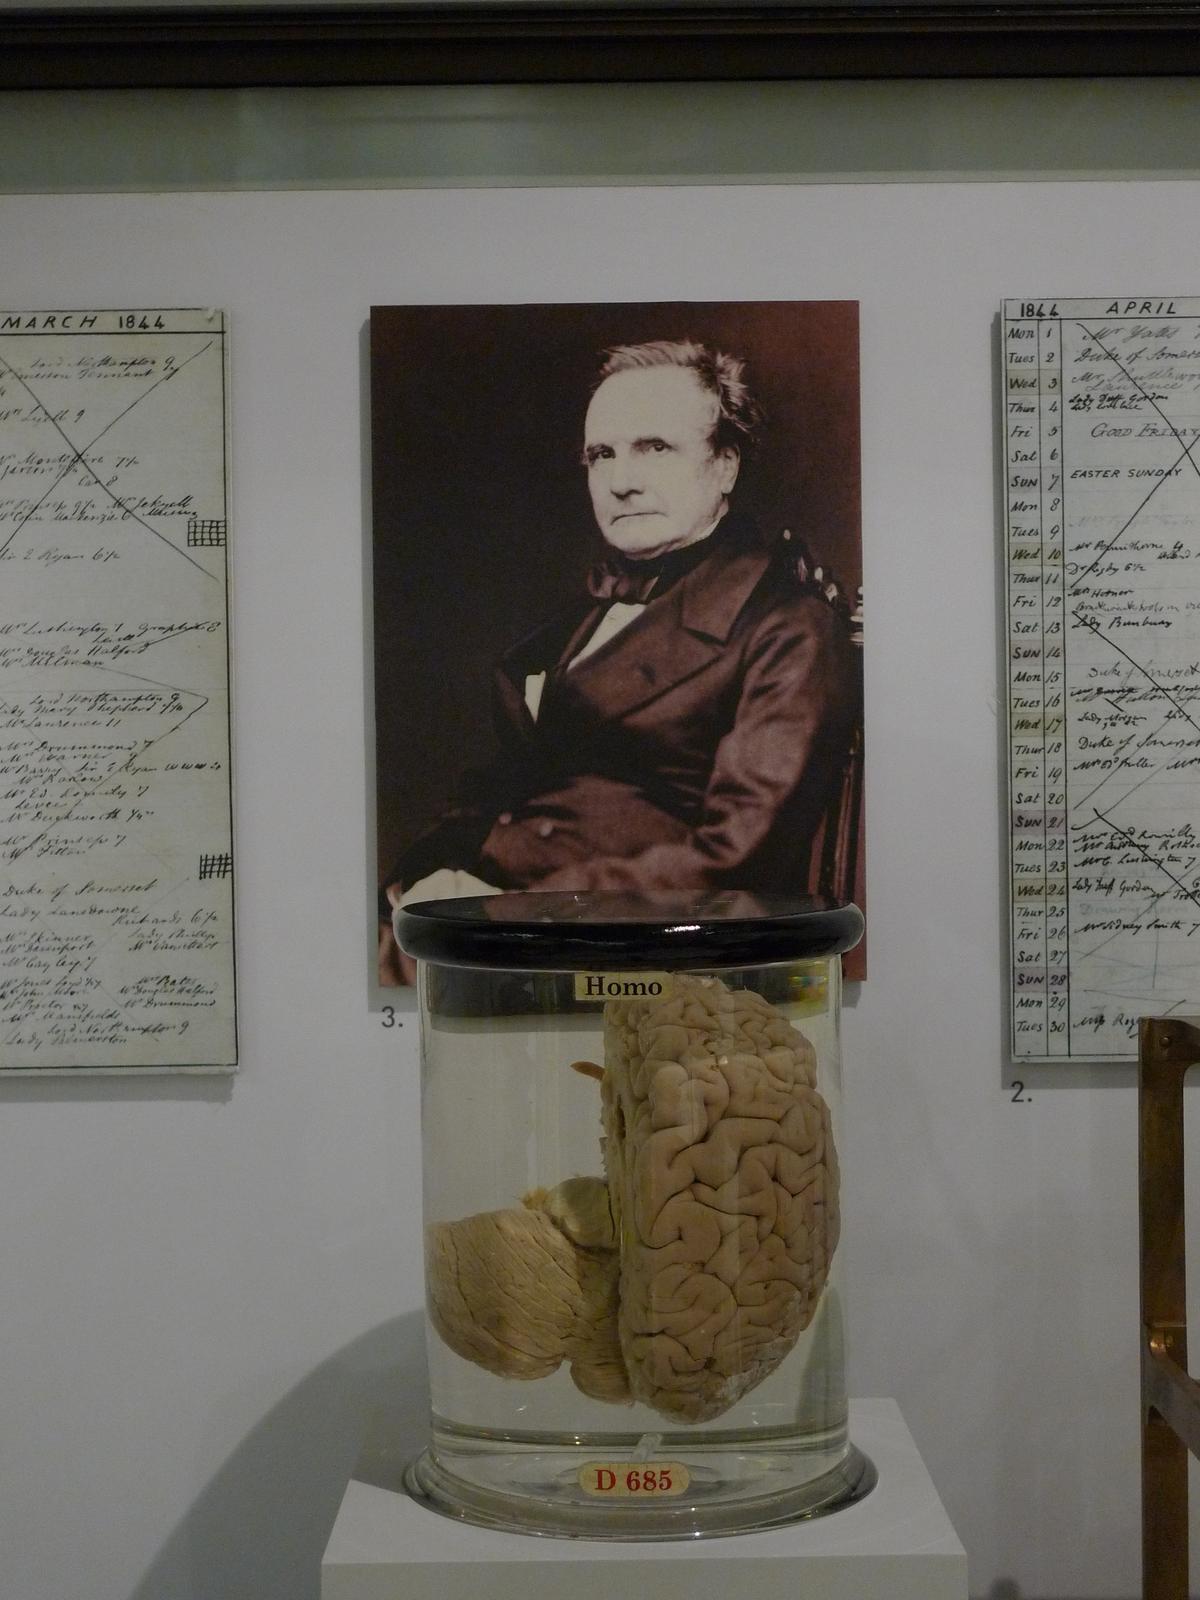 Underestimation of the father of the computer Charles Babbage by contemporaries - Charles Babbage, Computer, Creative people, Birthday, Youtube, Longpost